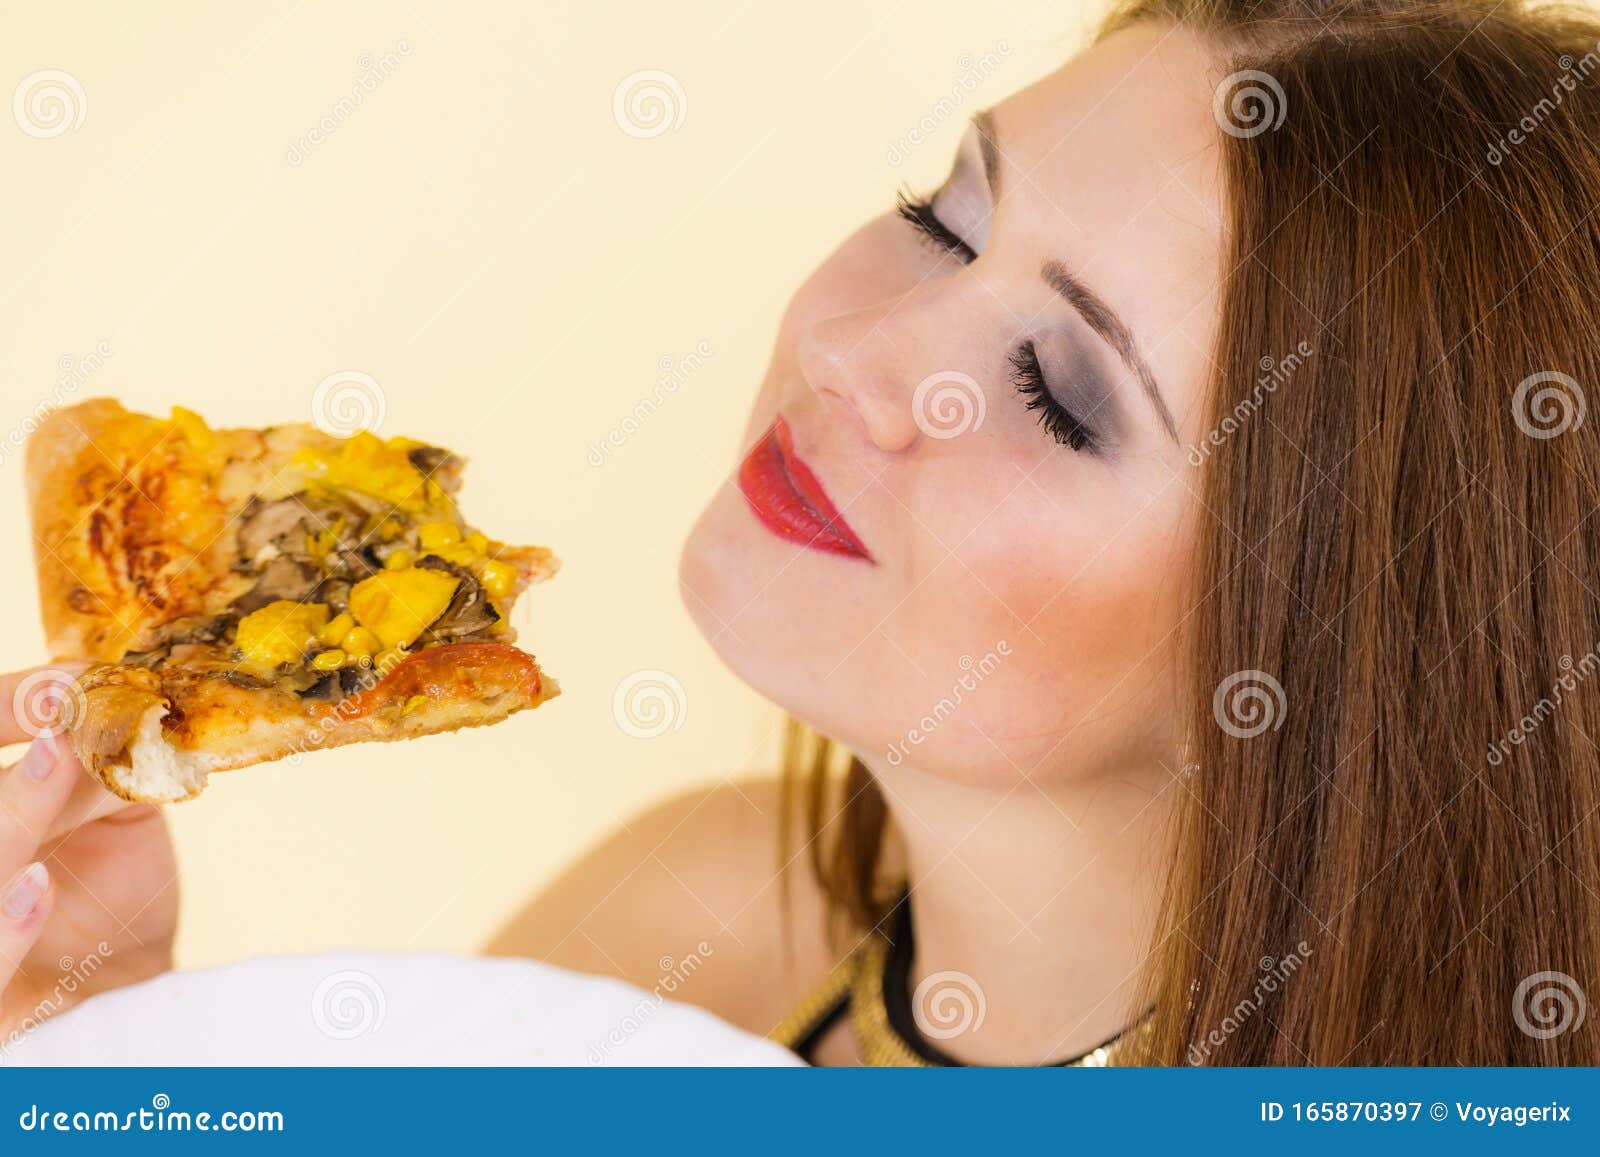 Woman Eating Hot Pizza Slice Stock Image Image Of Meal Unhealthy